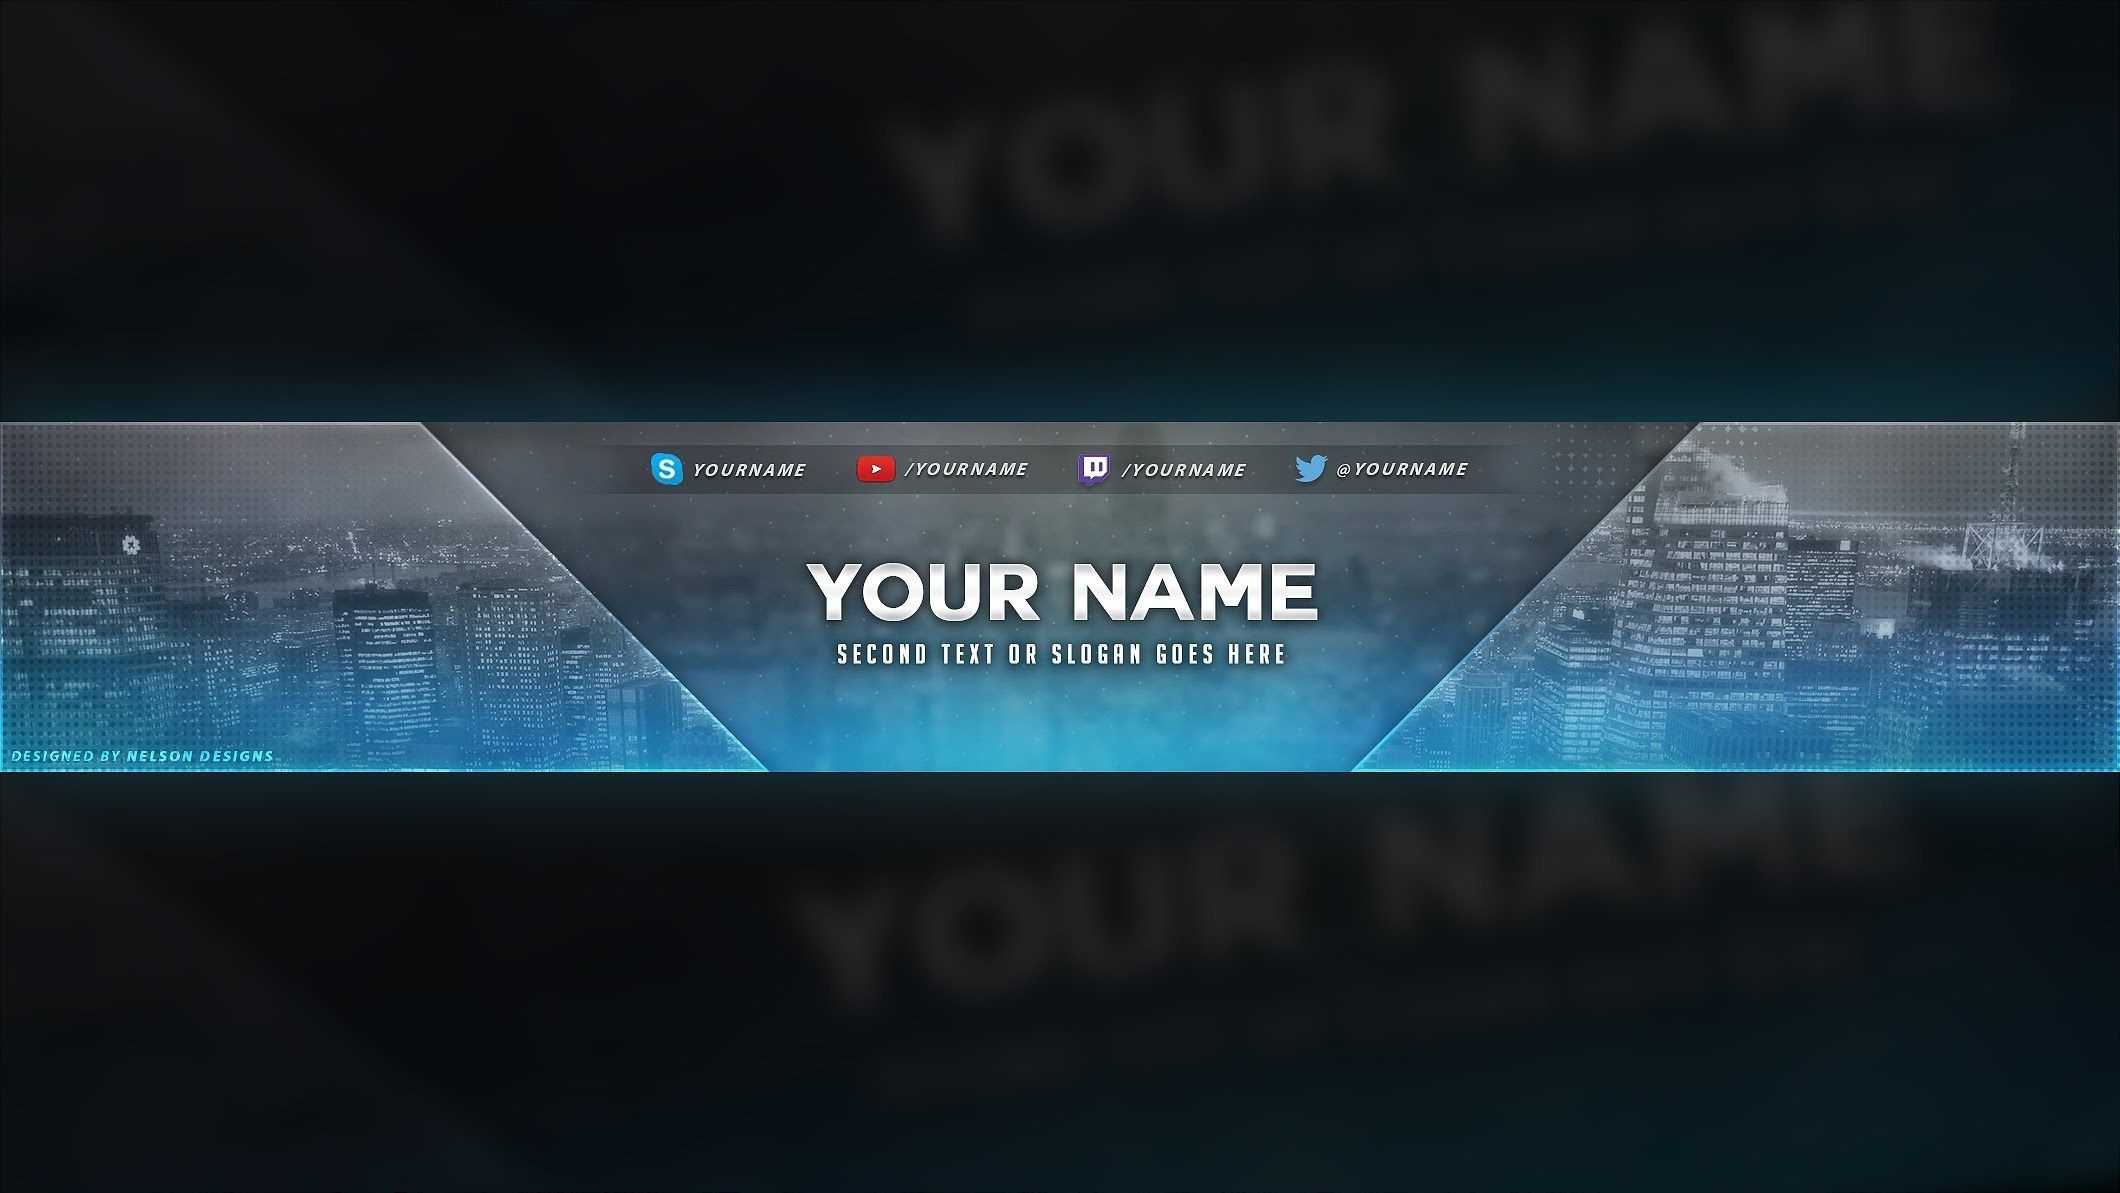 4 Free Youtube Banner Psd Template Designs – Social Media Regarding Banner Template For Photoshop